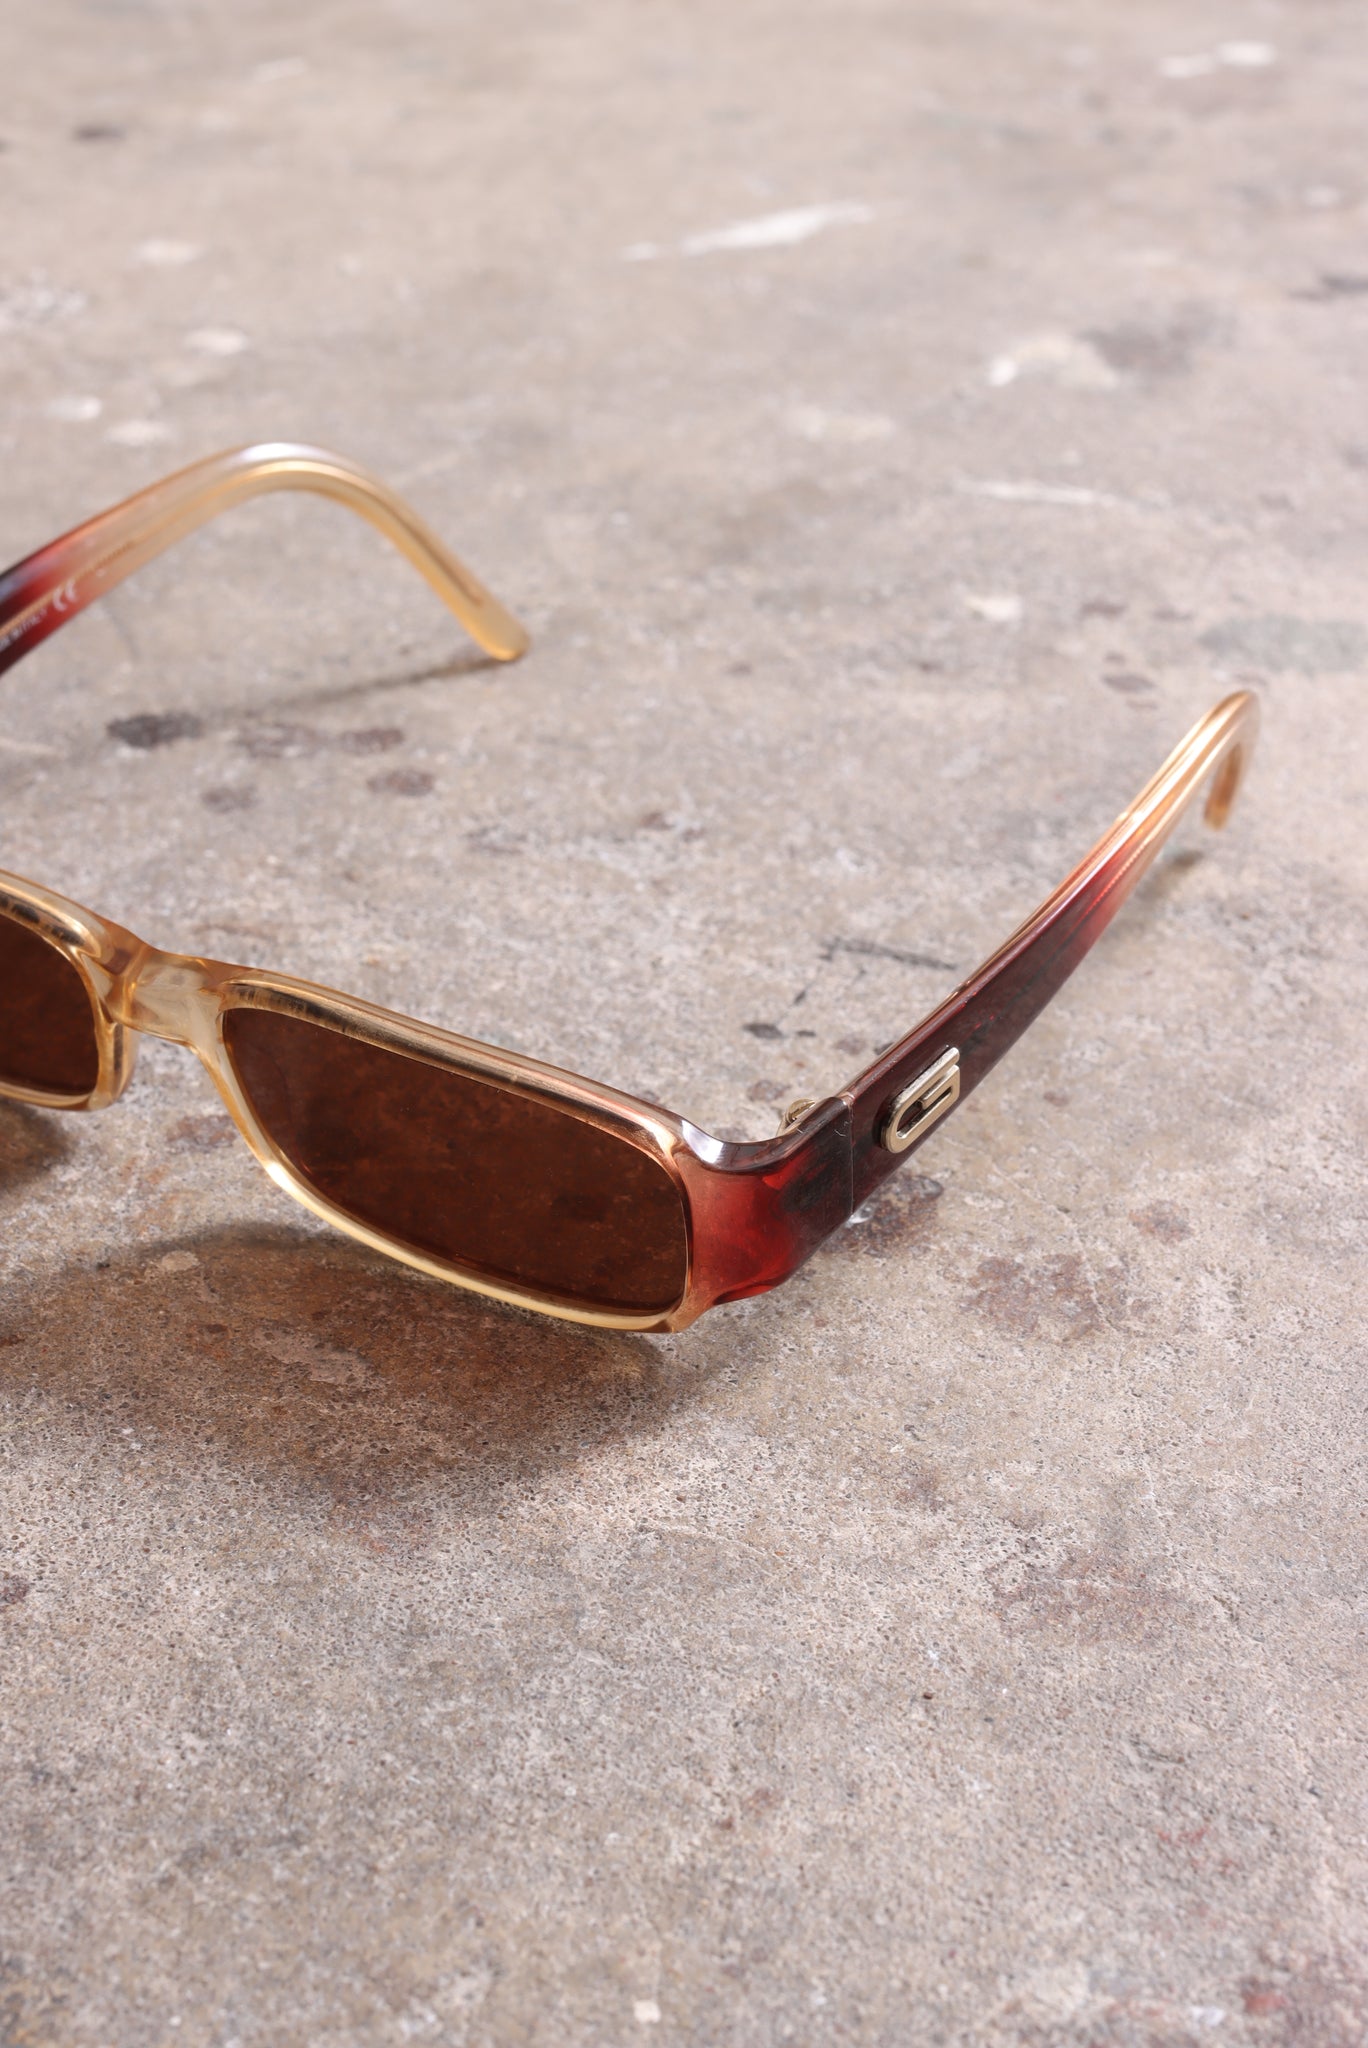 GUCCI BROWN SUNGLASSES - Amsterdam Vintage Clothing | AVC